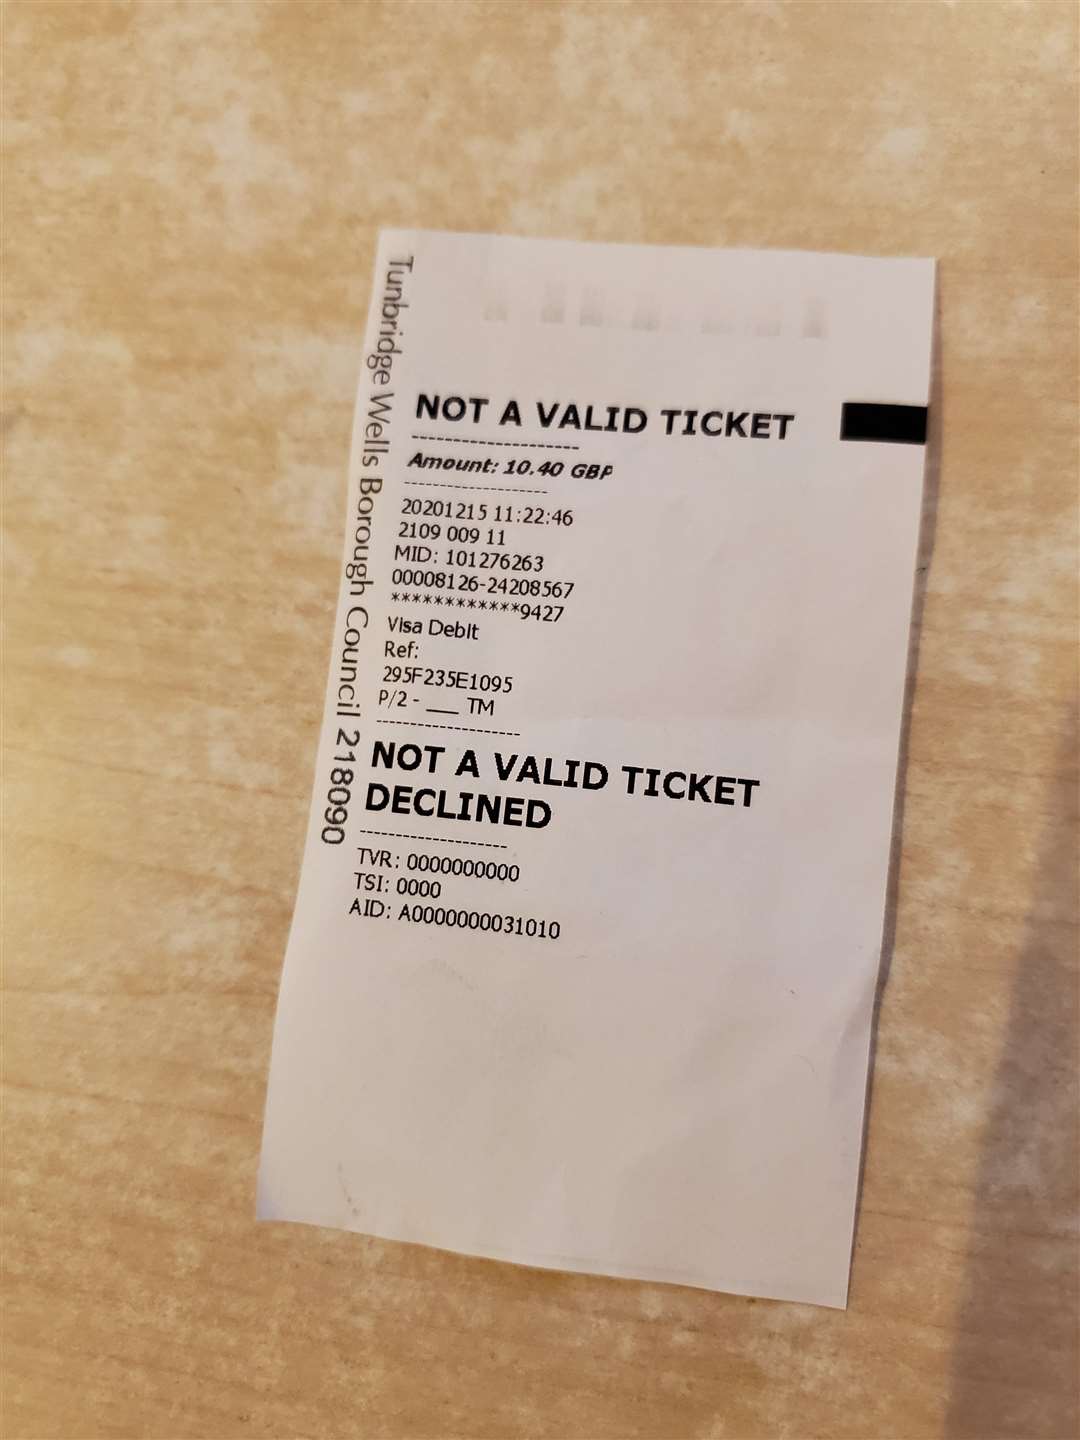 The 'invalid' ticket